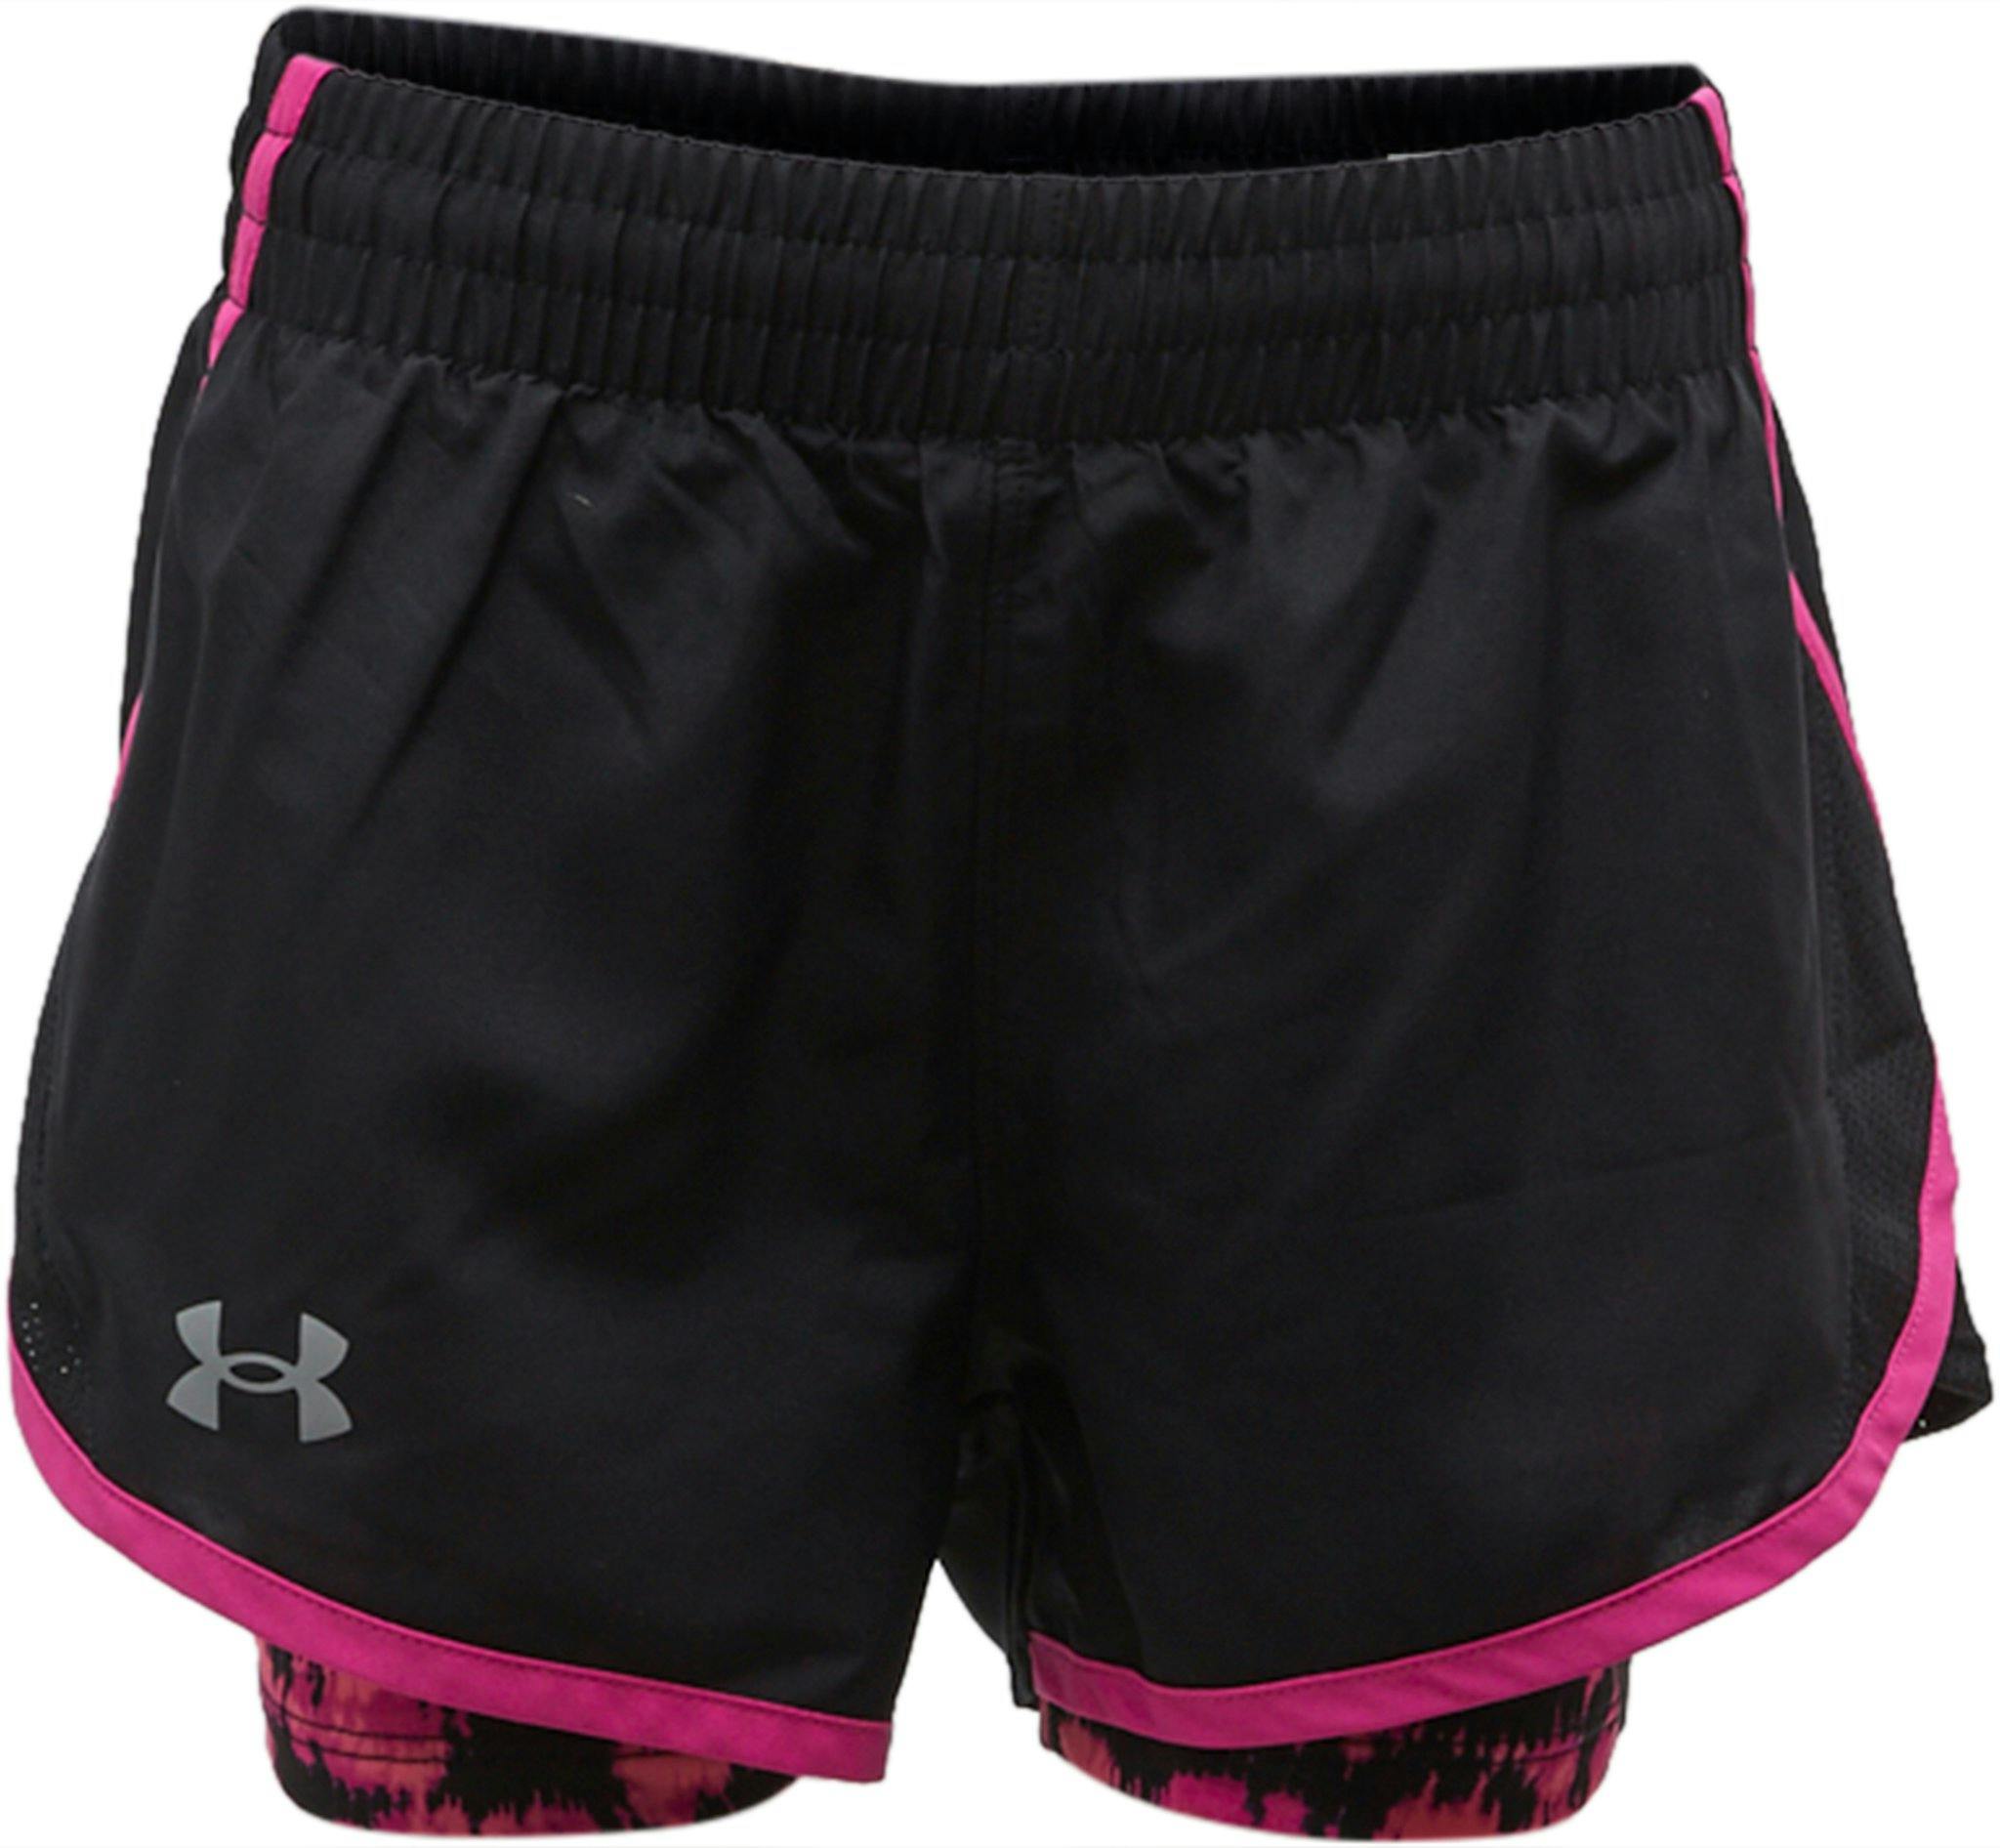 Product image for Fly-By 2-In-1 Shorts - Girls